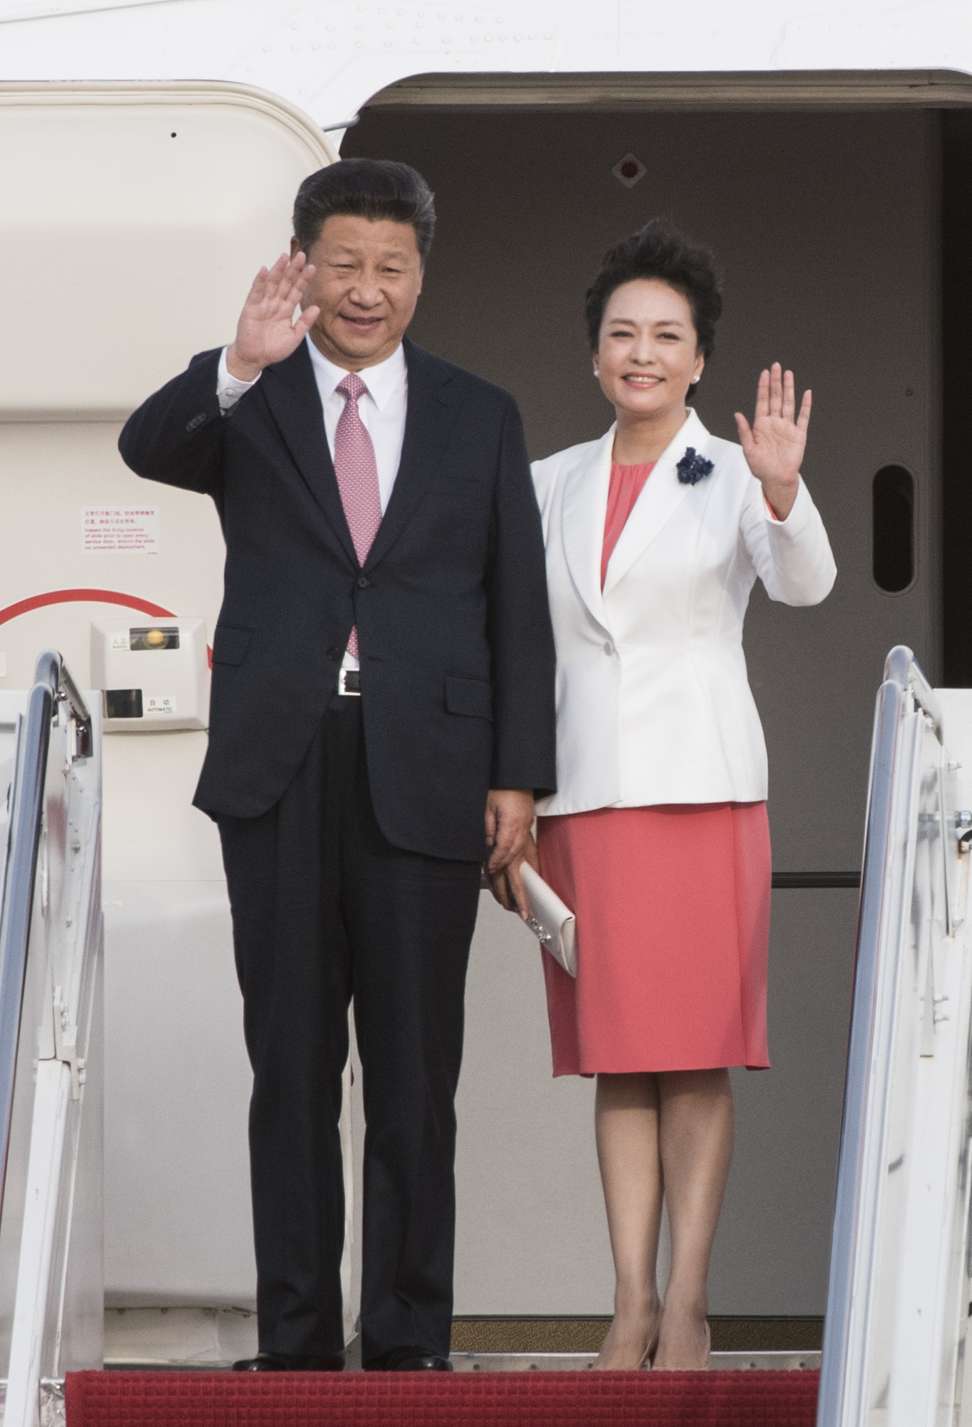 Chinese President Xi Jinping and his wife Peng Liyuan arrive at Andrews Air Force Base in Washington on September 24, 2015, on Xi’s first state visit to the United States. Photo: Xinhua